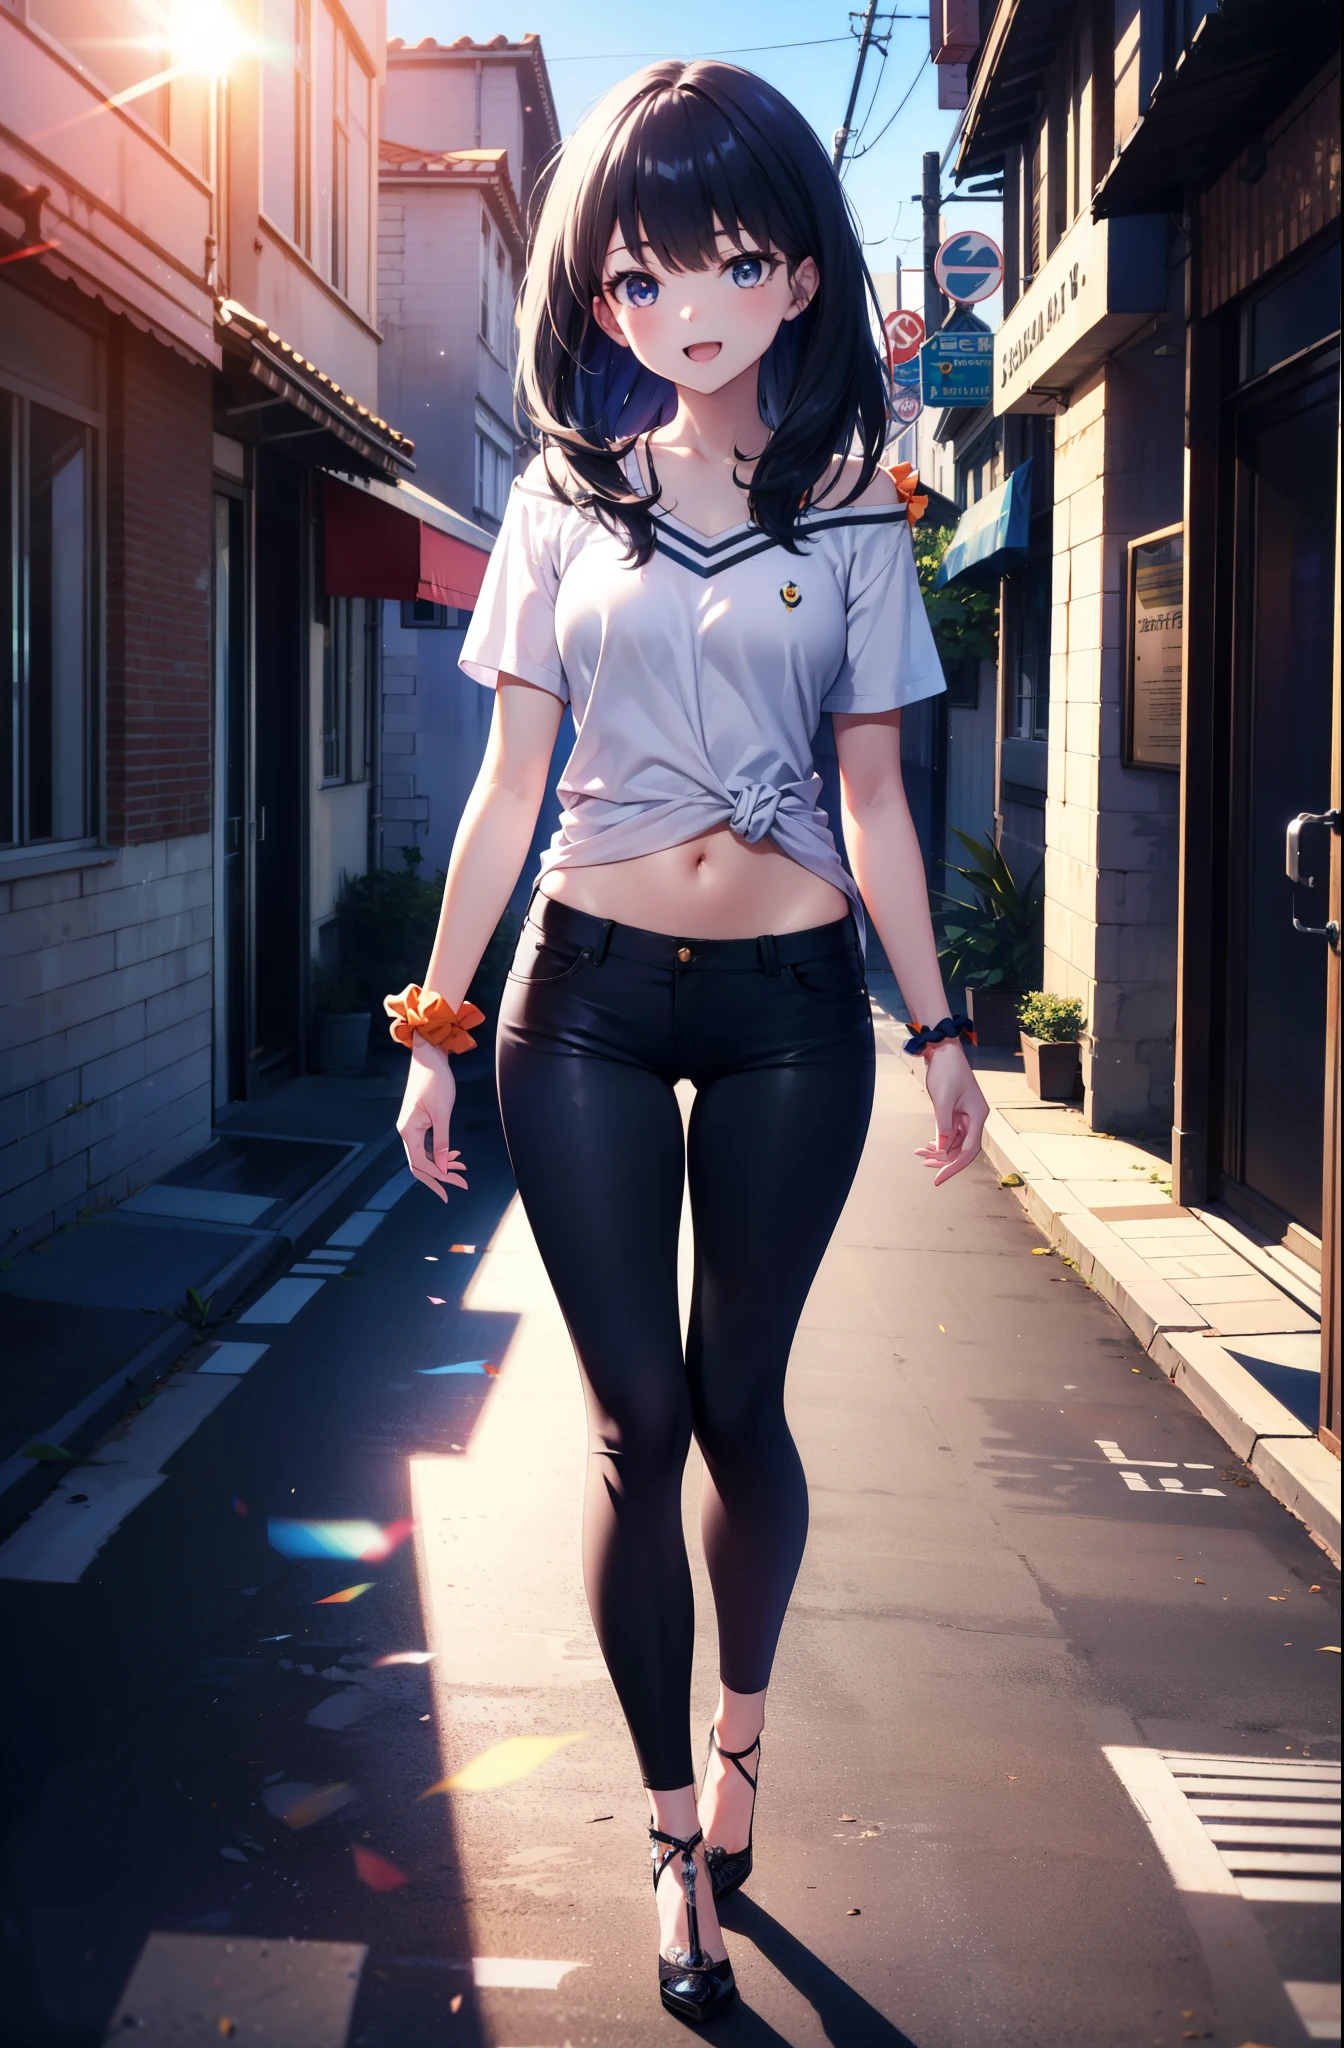 Rikka body, rikka takarada, Black Hair, blue eyes, Long Hair, orange Scrunchie, Scrunchie, wrist Scrunchie,happy smile, smile, Open your mouth,Cold shoulder tops,Short sleeve,skinny pants,Stiletto heels,Walking,morning,morning陽,The sun is rising,So that the whole body goes into the illustration,
Destroy outdoors, In town,Building district,
壊す looking at viewer, Systemic
break (masterpiece:1.2), highest quality, High resolution, unity 8k wallpaper, (figure:0.8), (Beautiful fine details:1.6), Highly detailed face, Perfect lighting, Highly detailed CG, (Perfect hands, Perfect Anatomy),